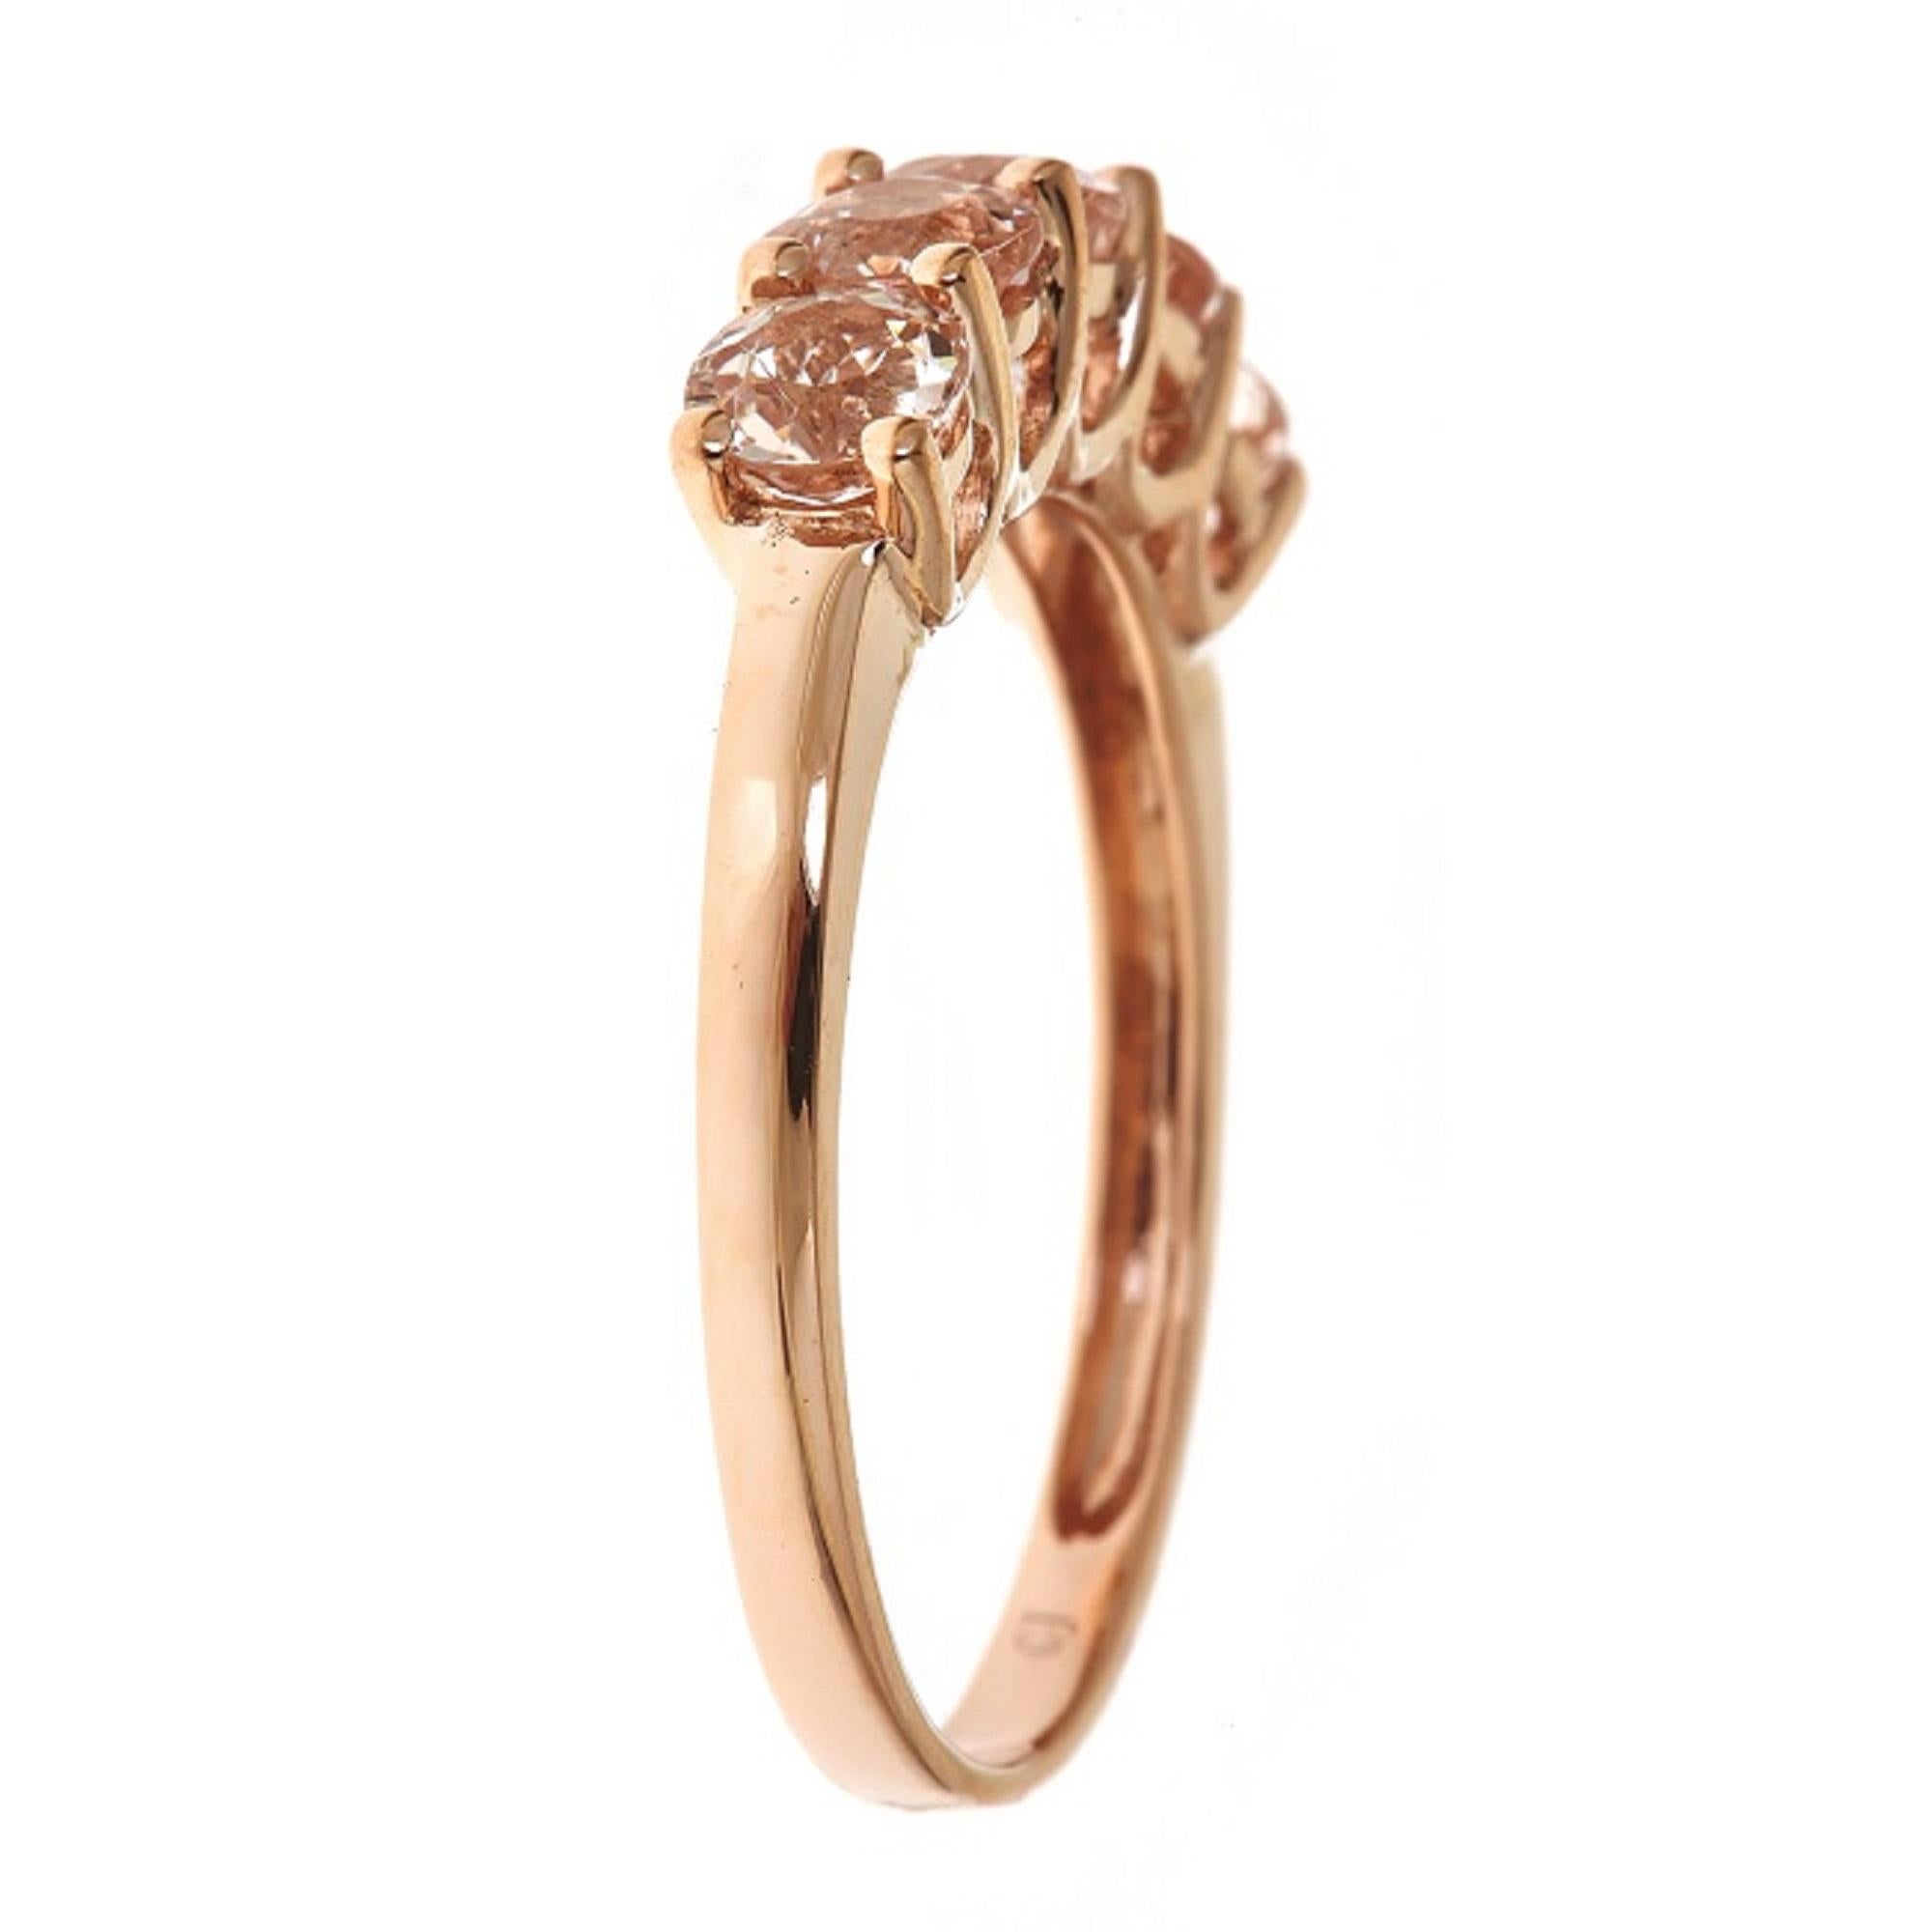 Stunning, timeless and classy eternity Unique ring. Decorate yourself in luxury with this Gin & Grace ring. The 10k Rose Gold jewelry boasts Round-Cut Prong Setting Genuine Morganite (5 pcs) 1.13 Carat accent stones for a lovely design. This ring is